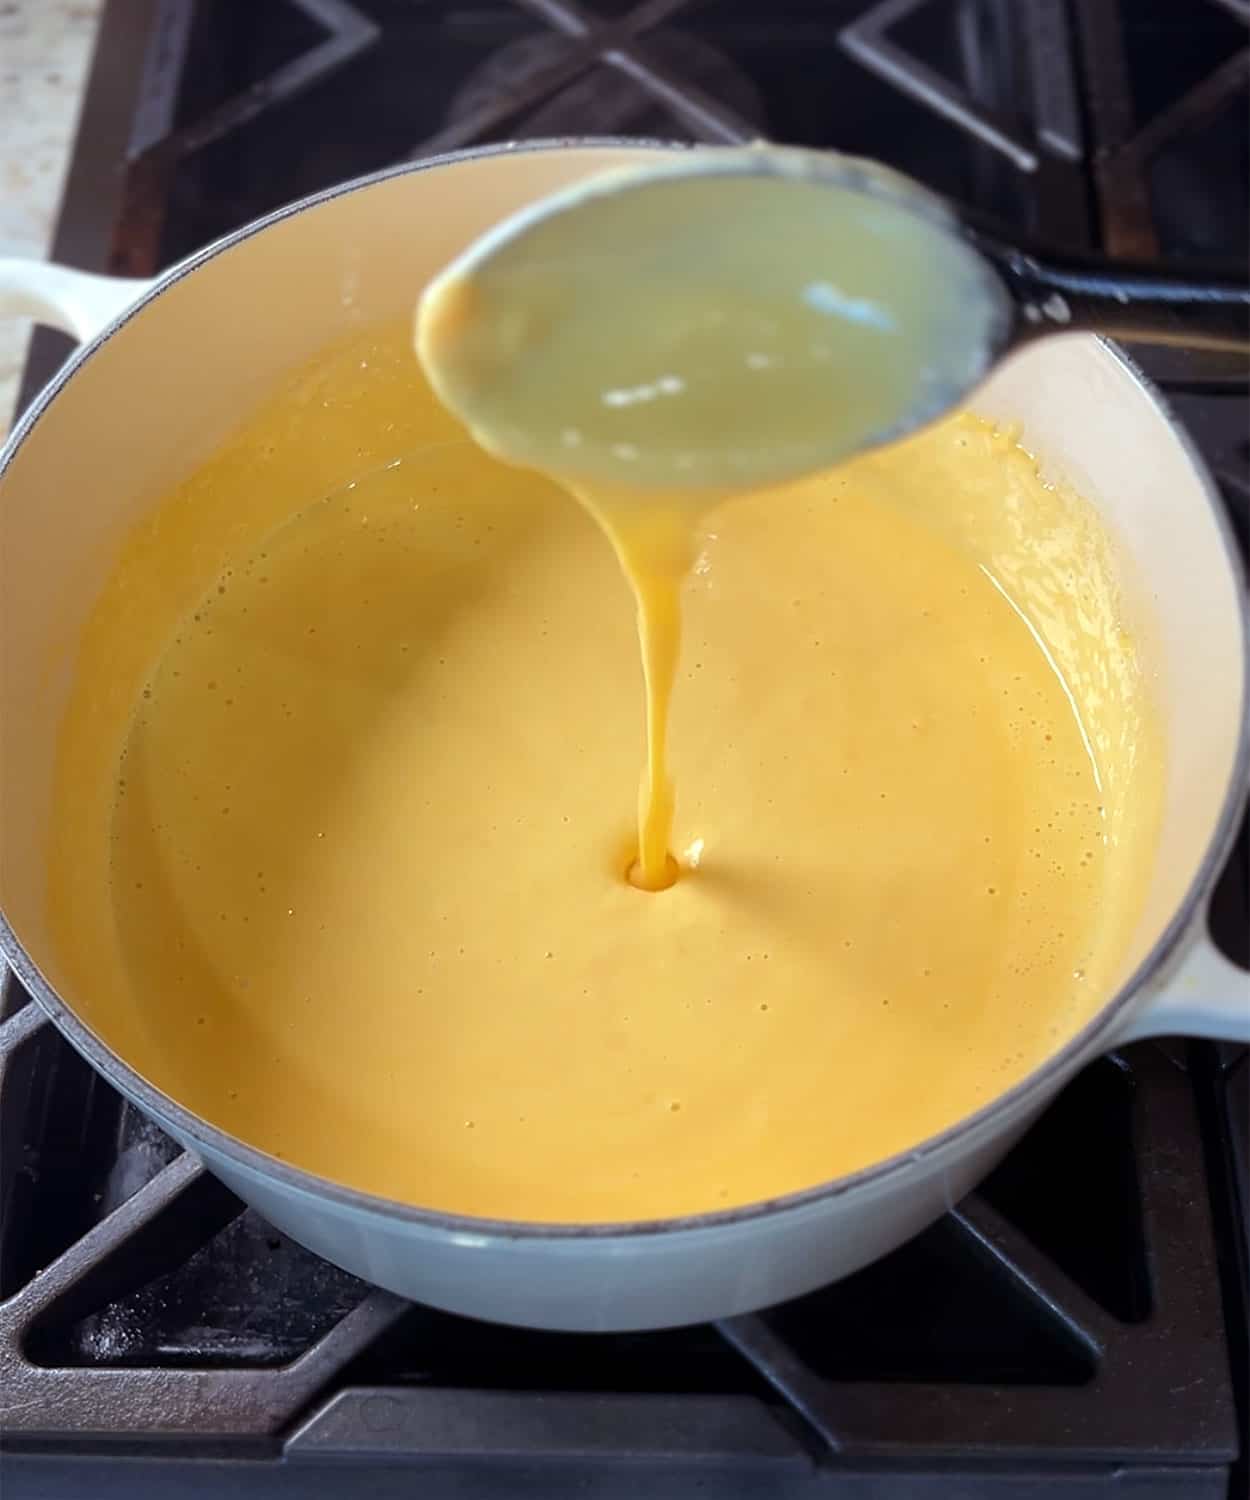 cheese sauce dripping off spoon